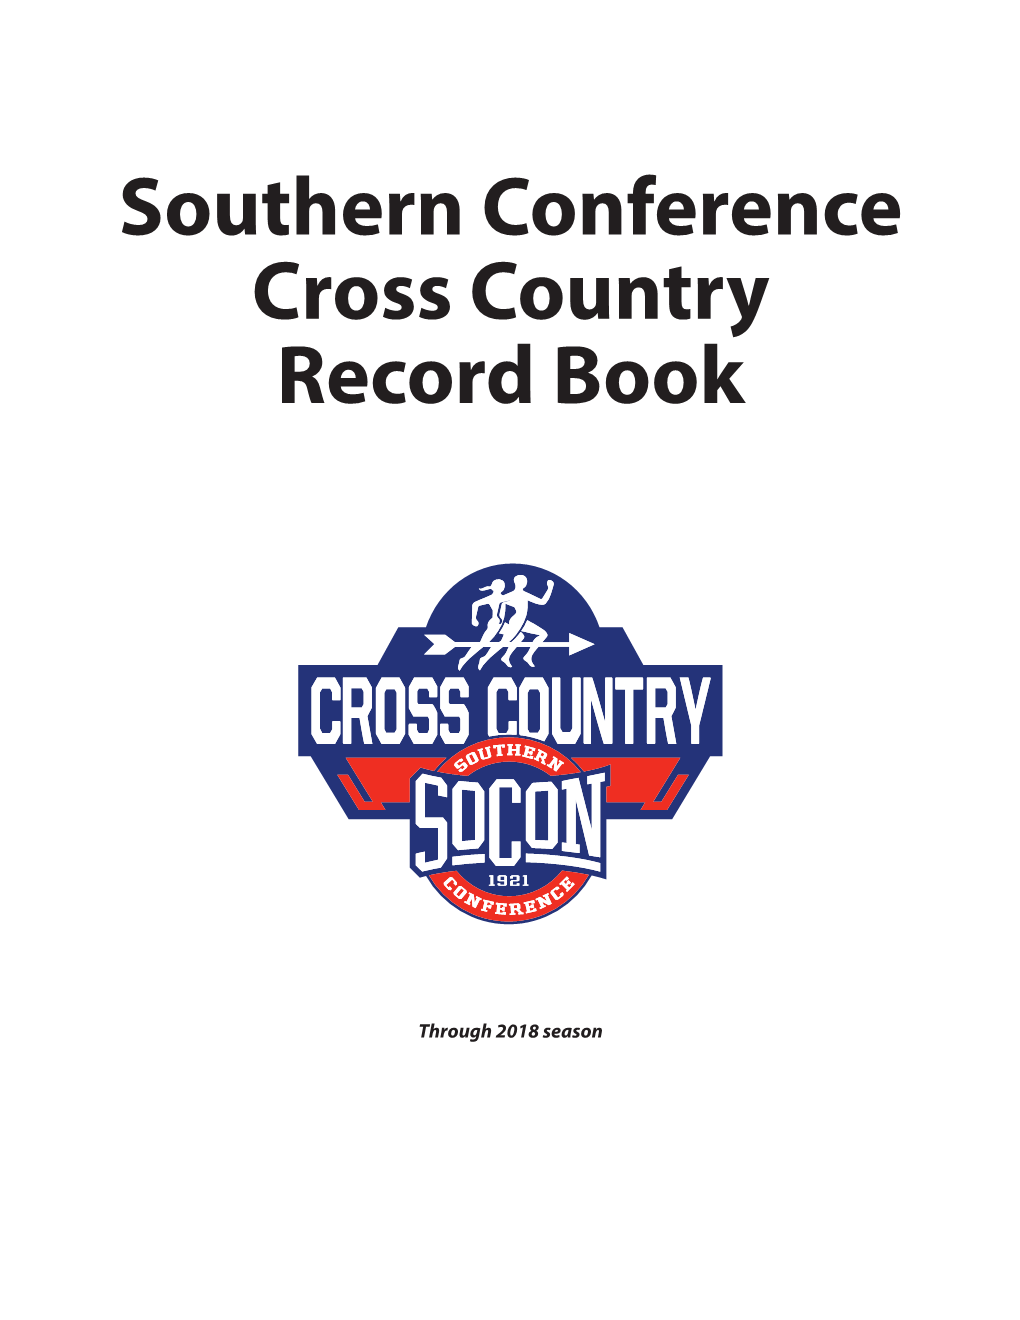 Southern Conference Cross Country Record Book